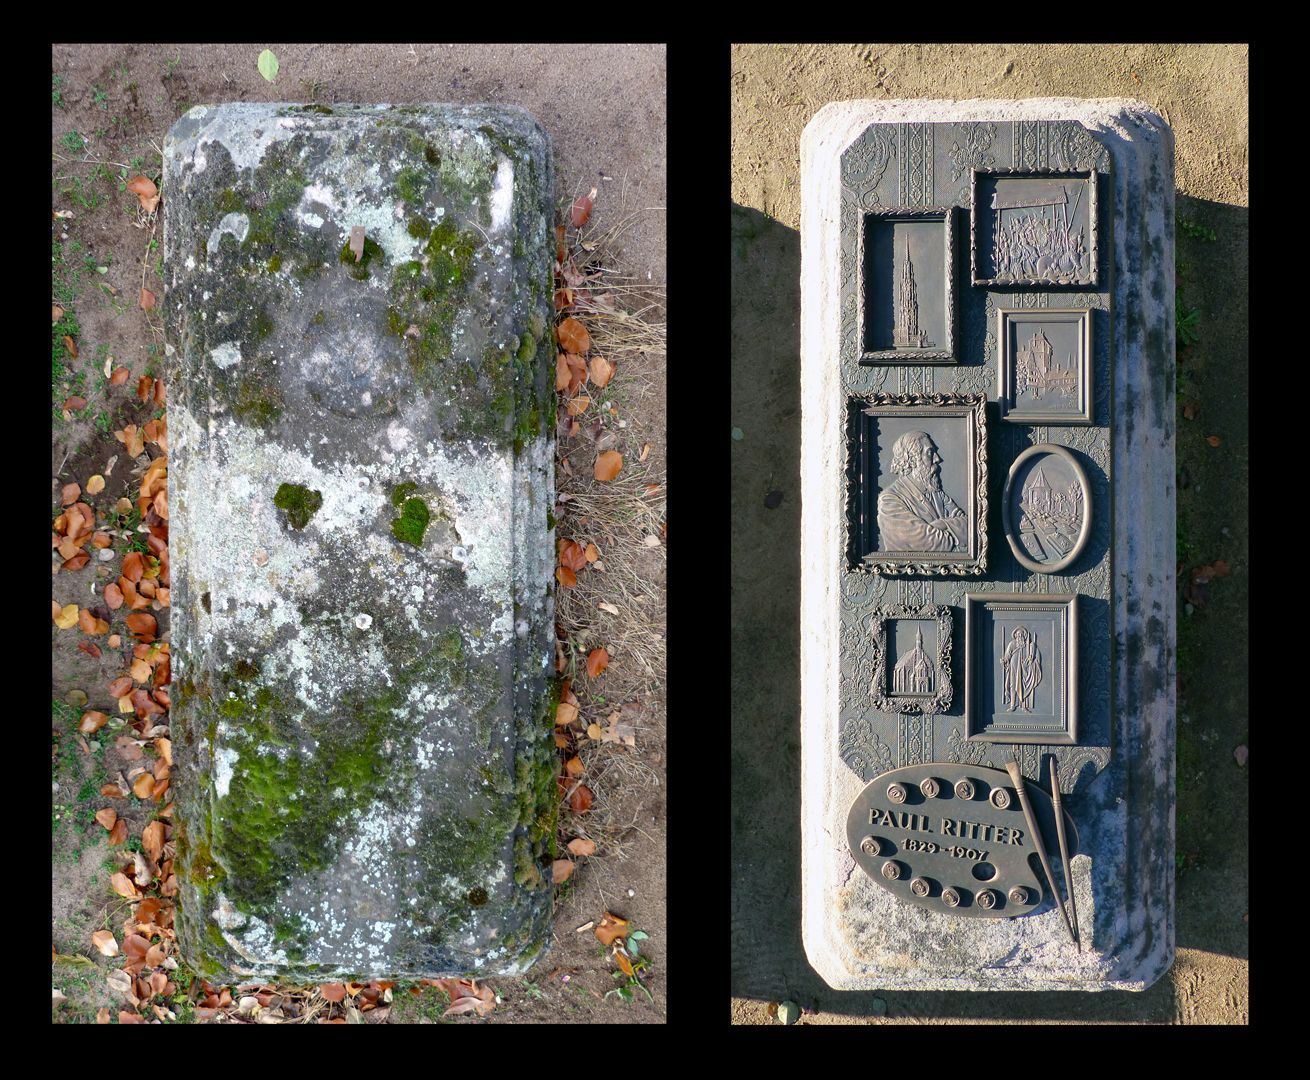 Paul Ritter grave site before - after / October 2018 and November 2020